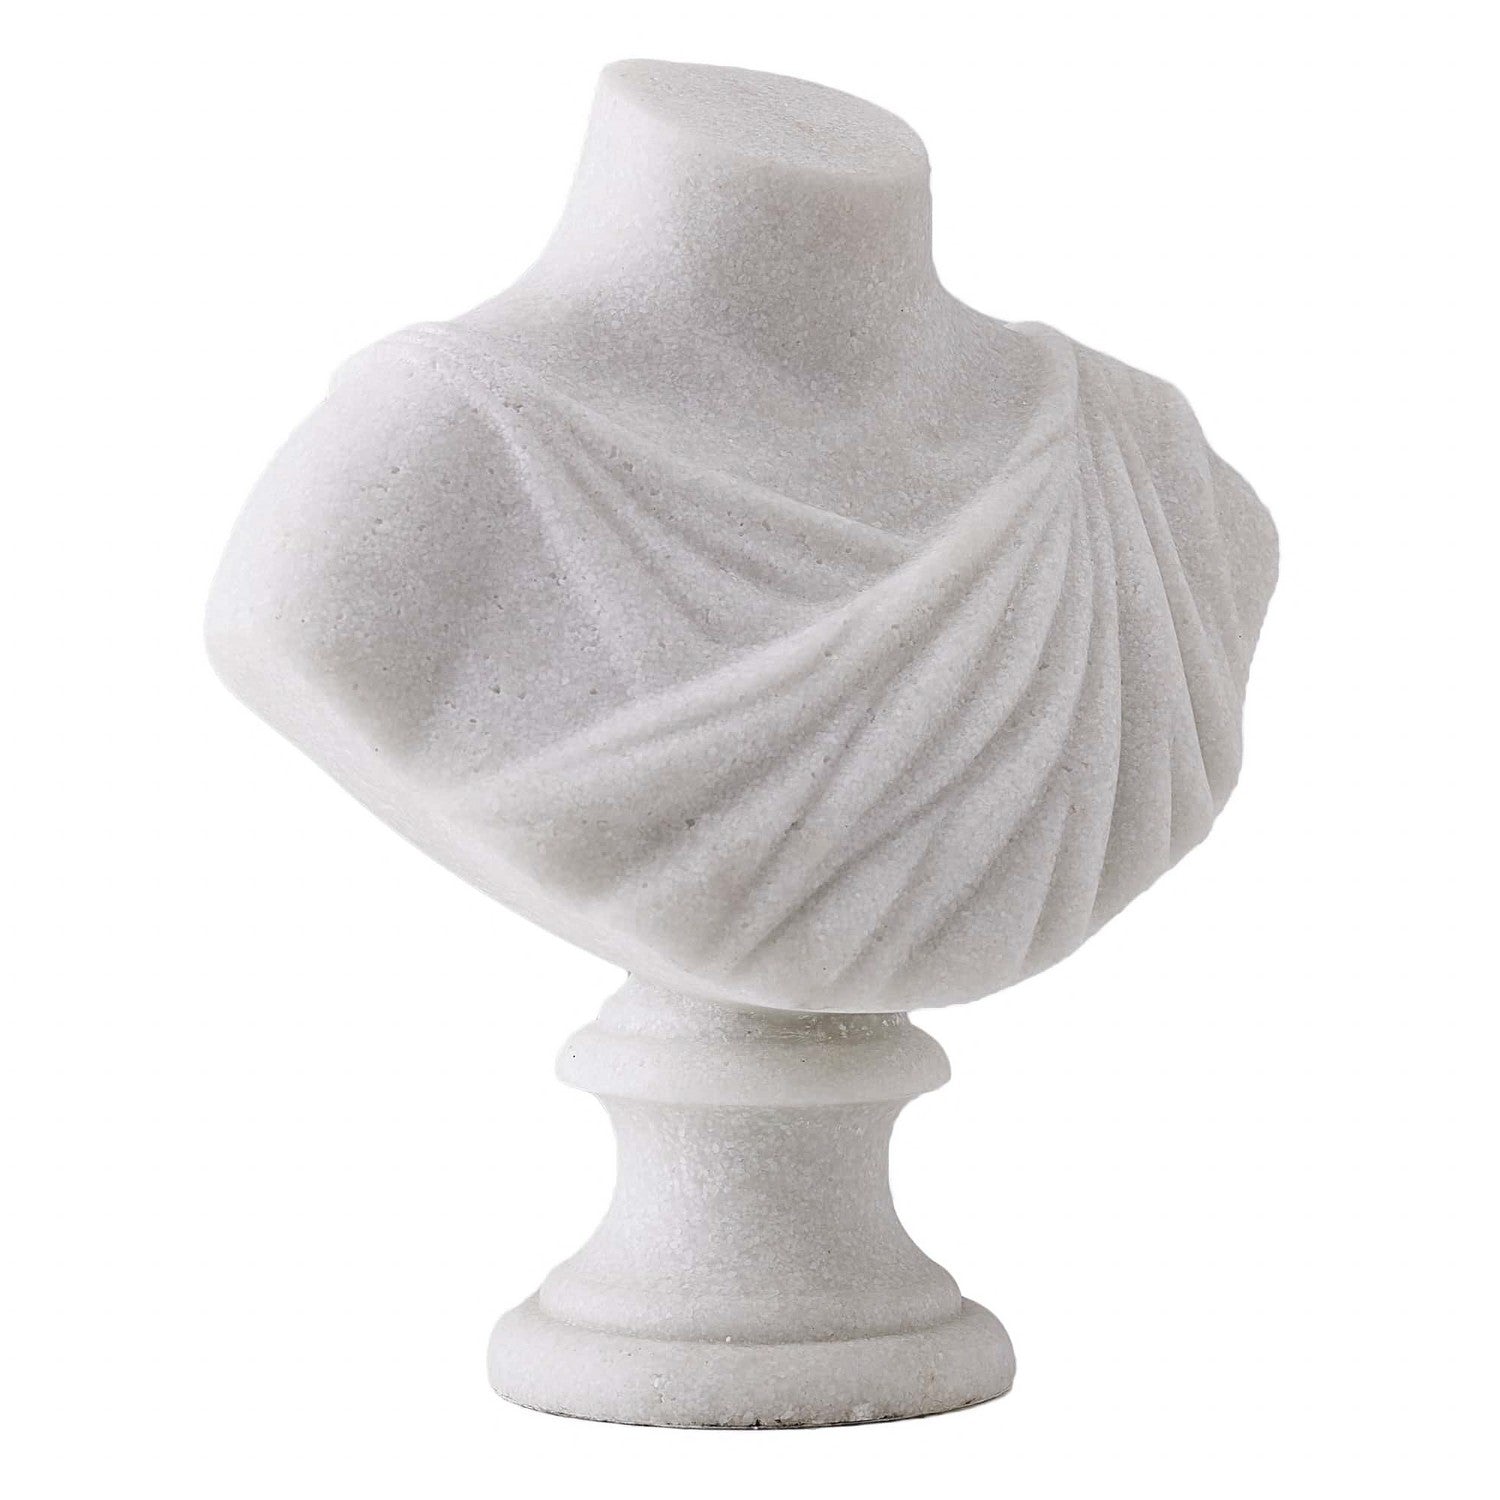 Sculpture from the Virtue collection in Ivory finish